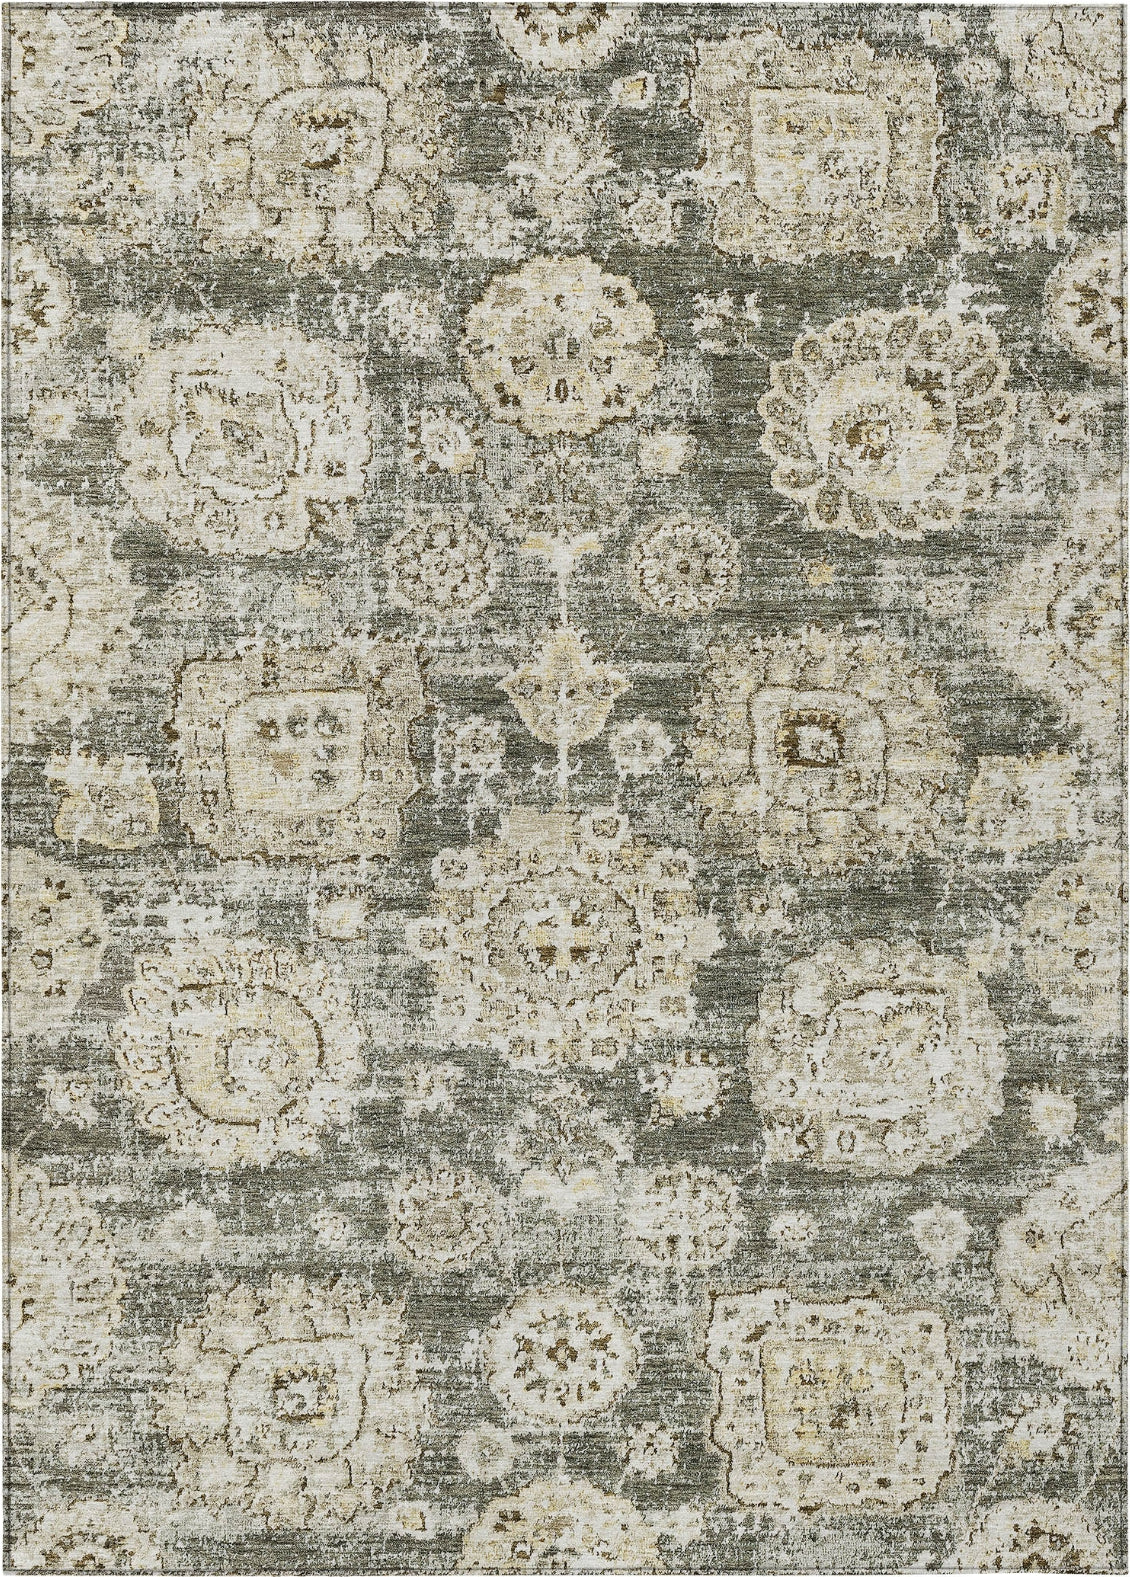 Piper Looms Chantille Floral ACN634 Taupe Area Rug